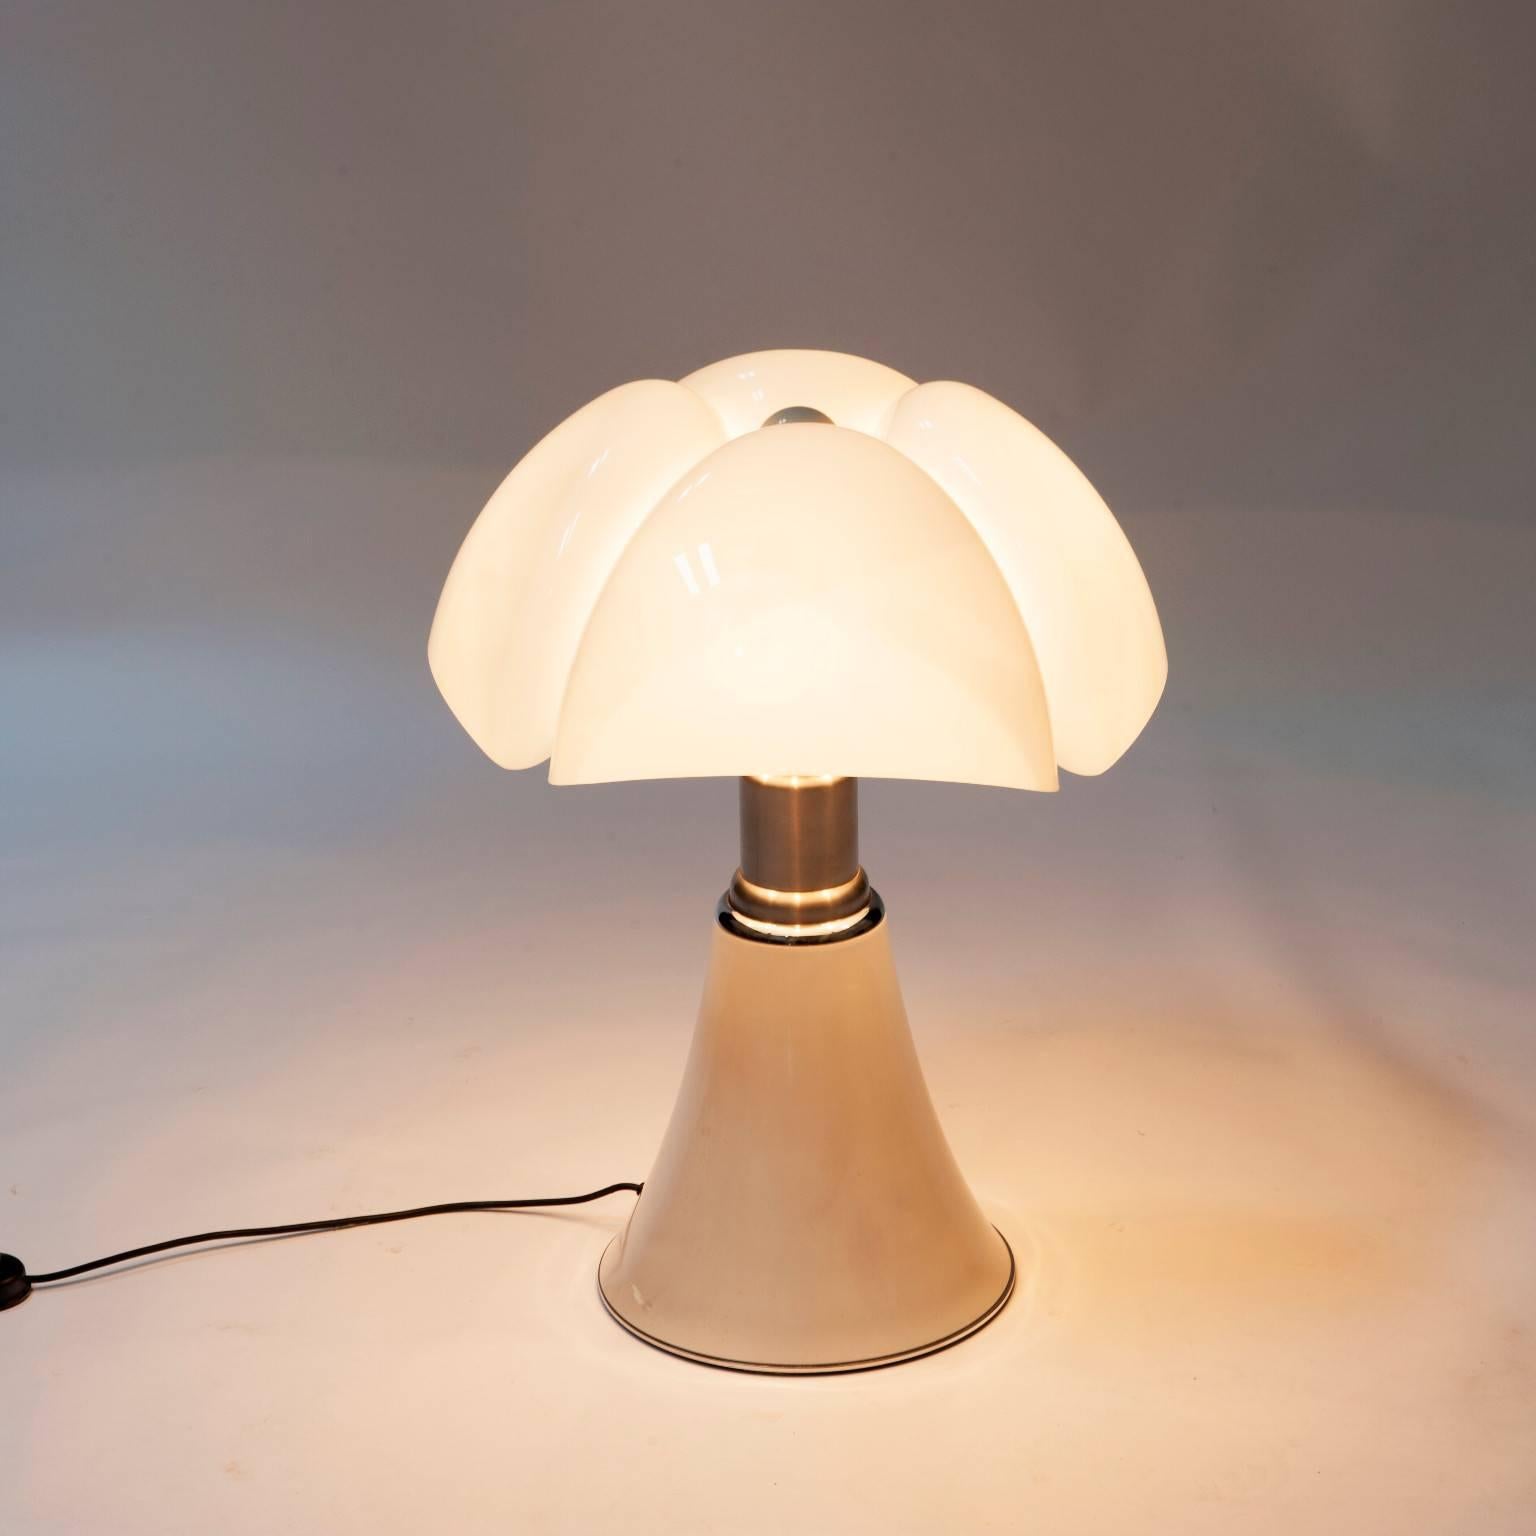 The Pipistrello table lamp was designed by Gae Aulenti for Martinelli Luce in 1965. 